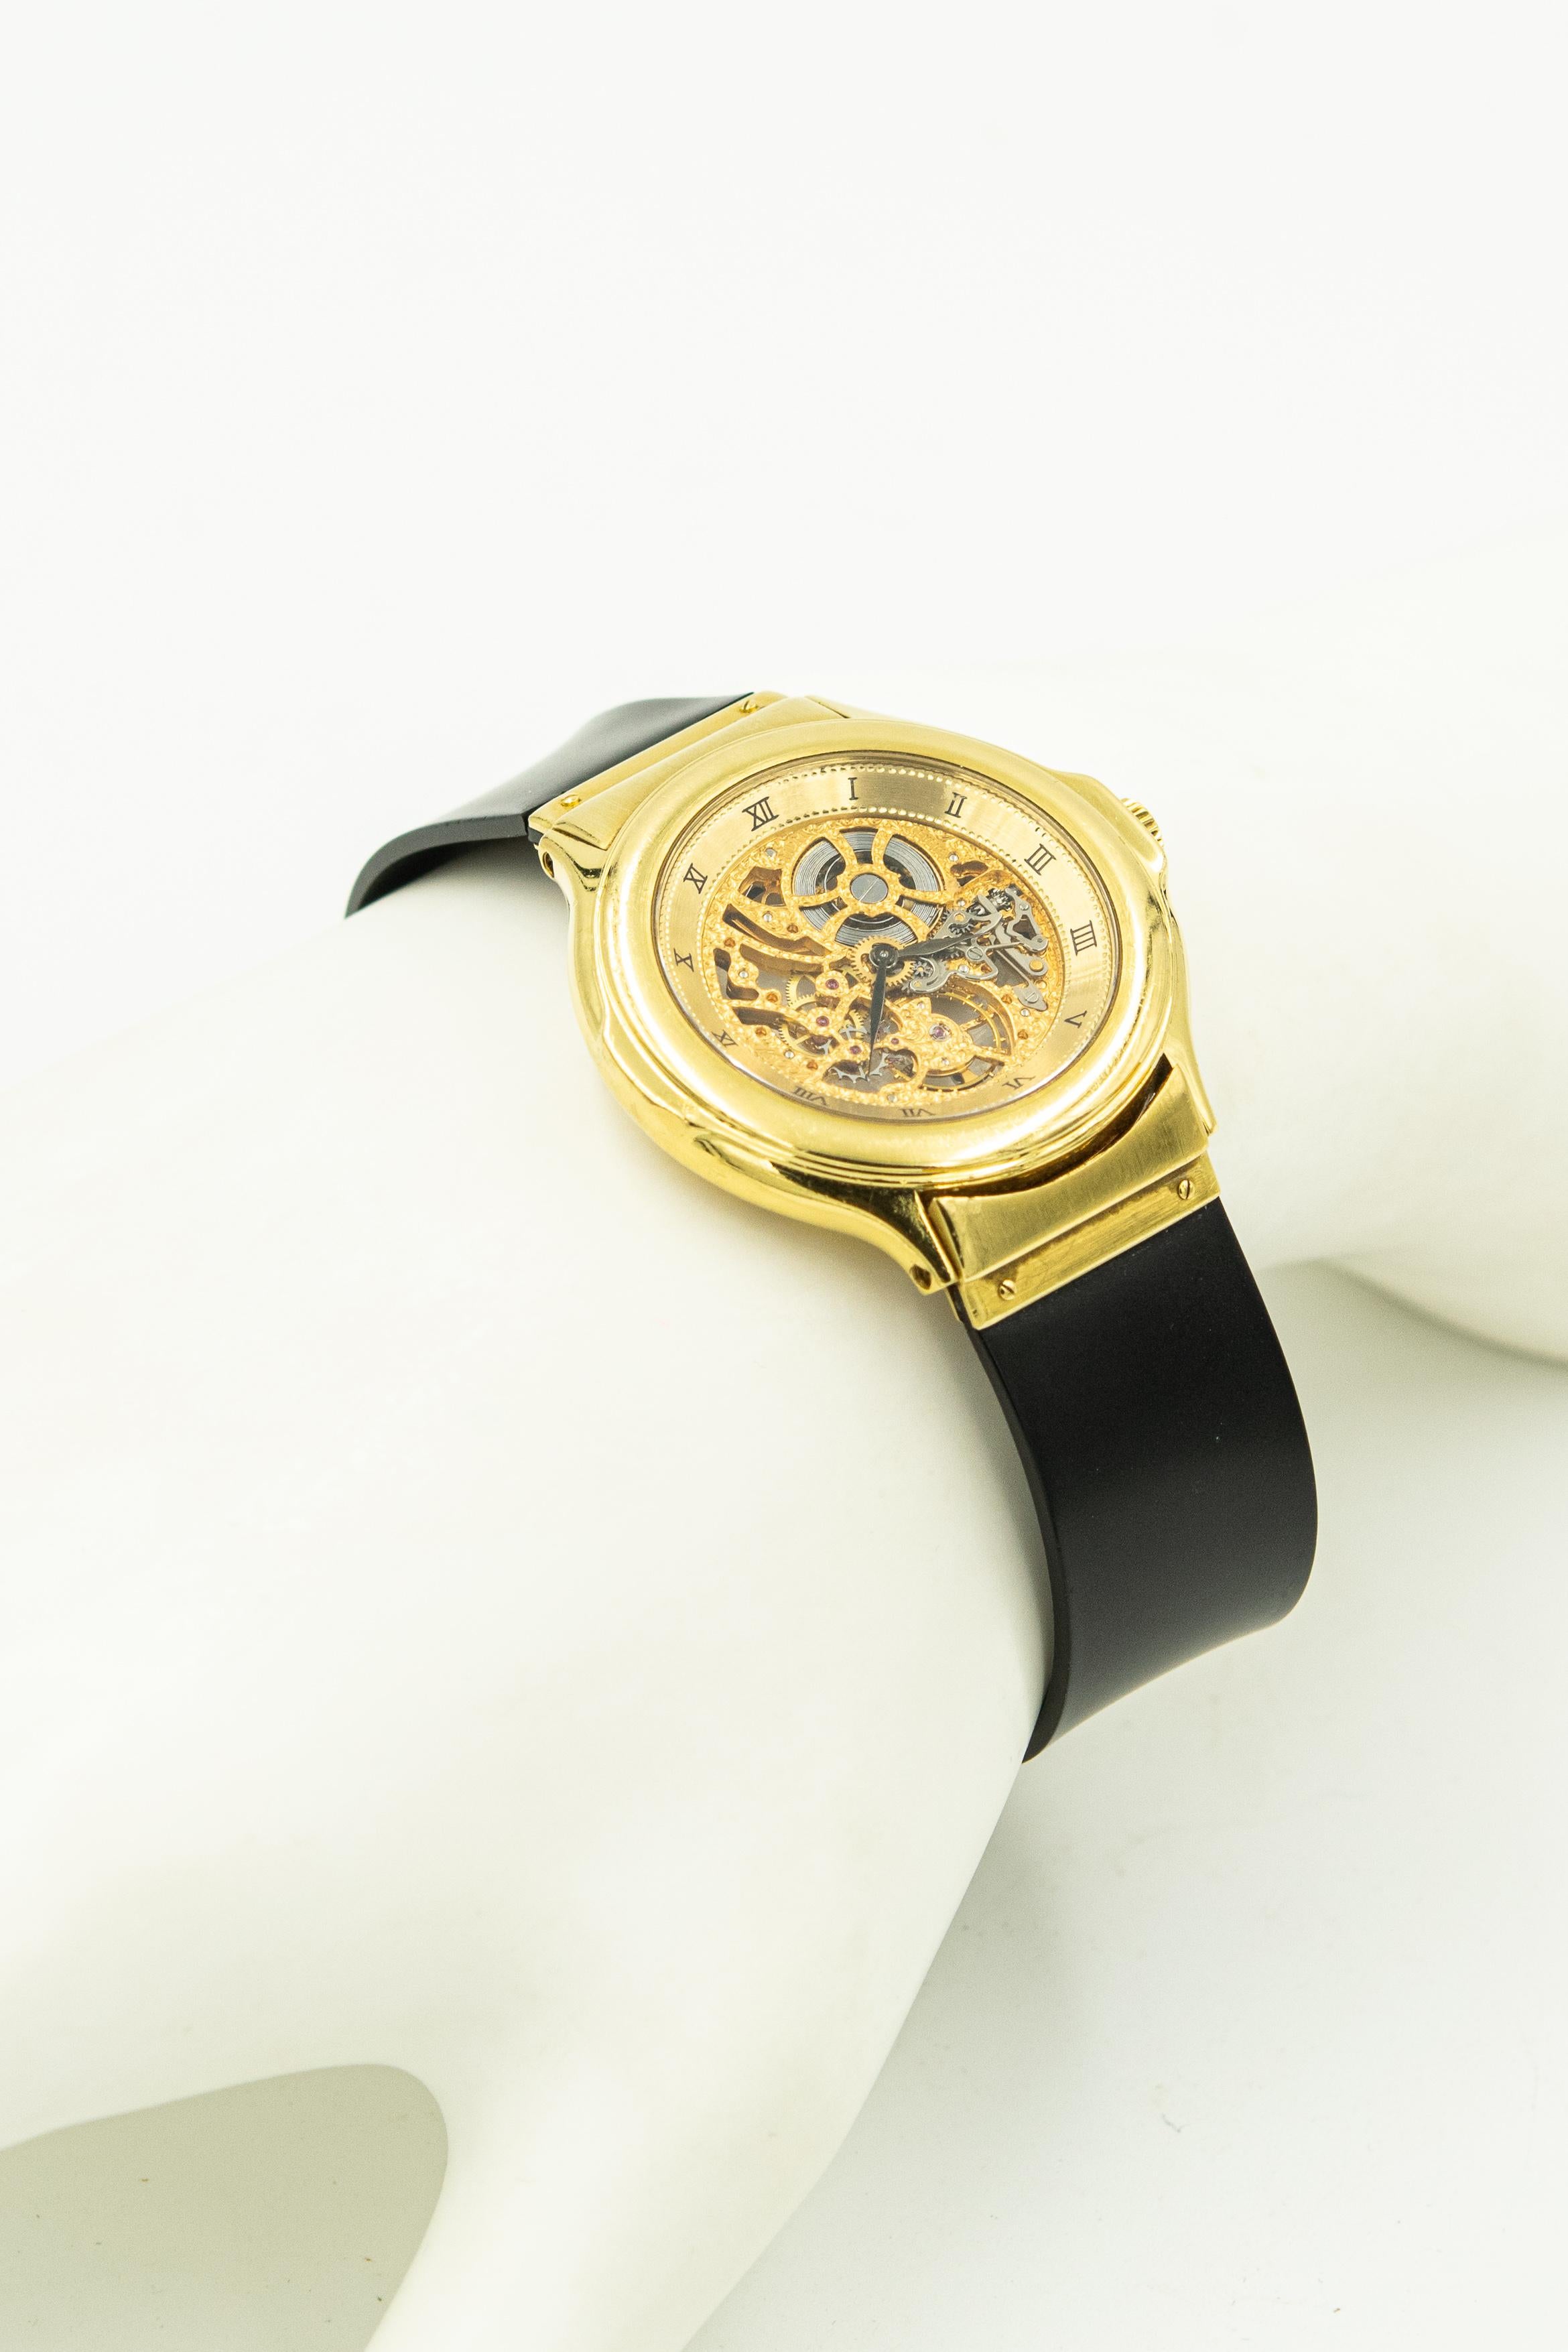 Limited Edition Hublot Unisex MDM Skeleton 18k Yellow Gold Watch Ref. 1512.3 For Sale 1